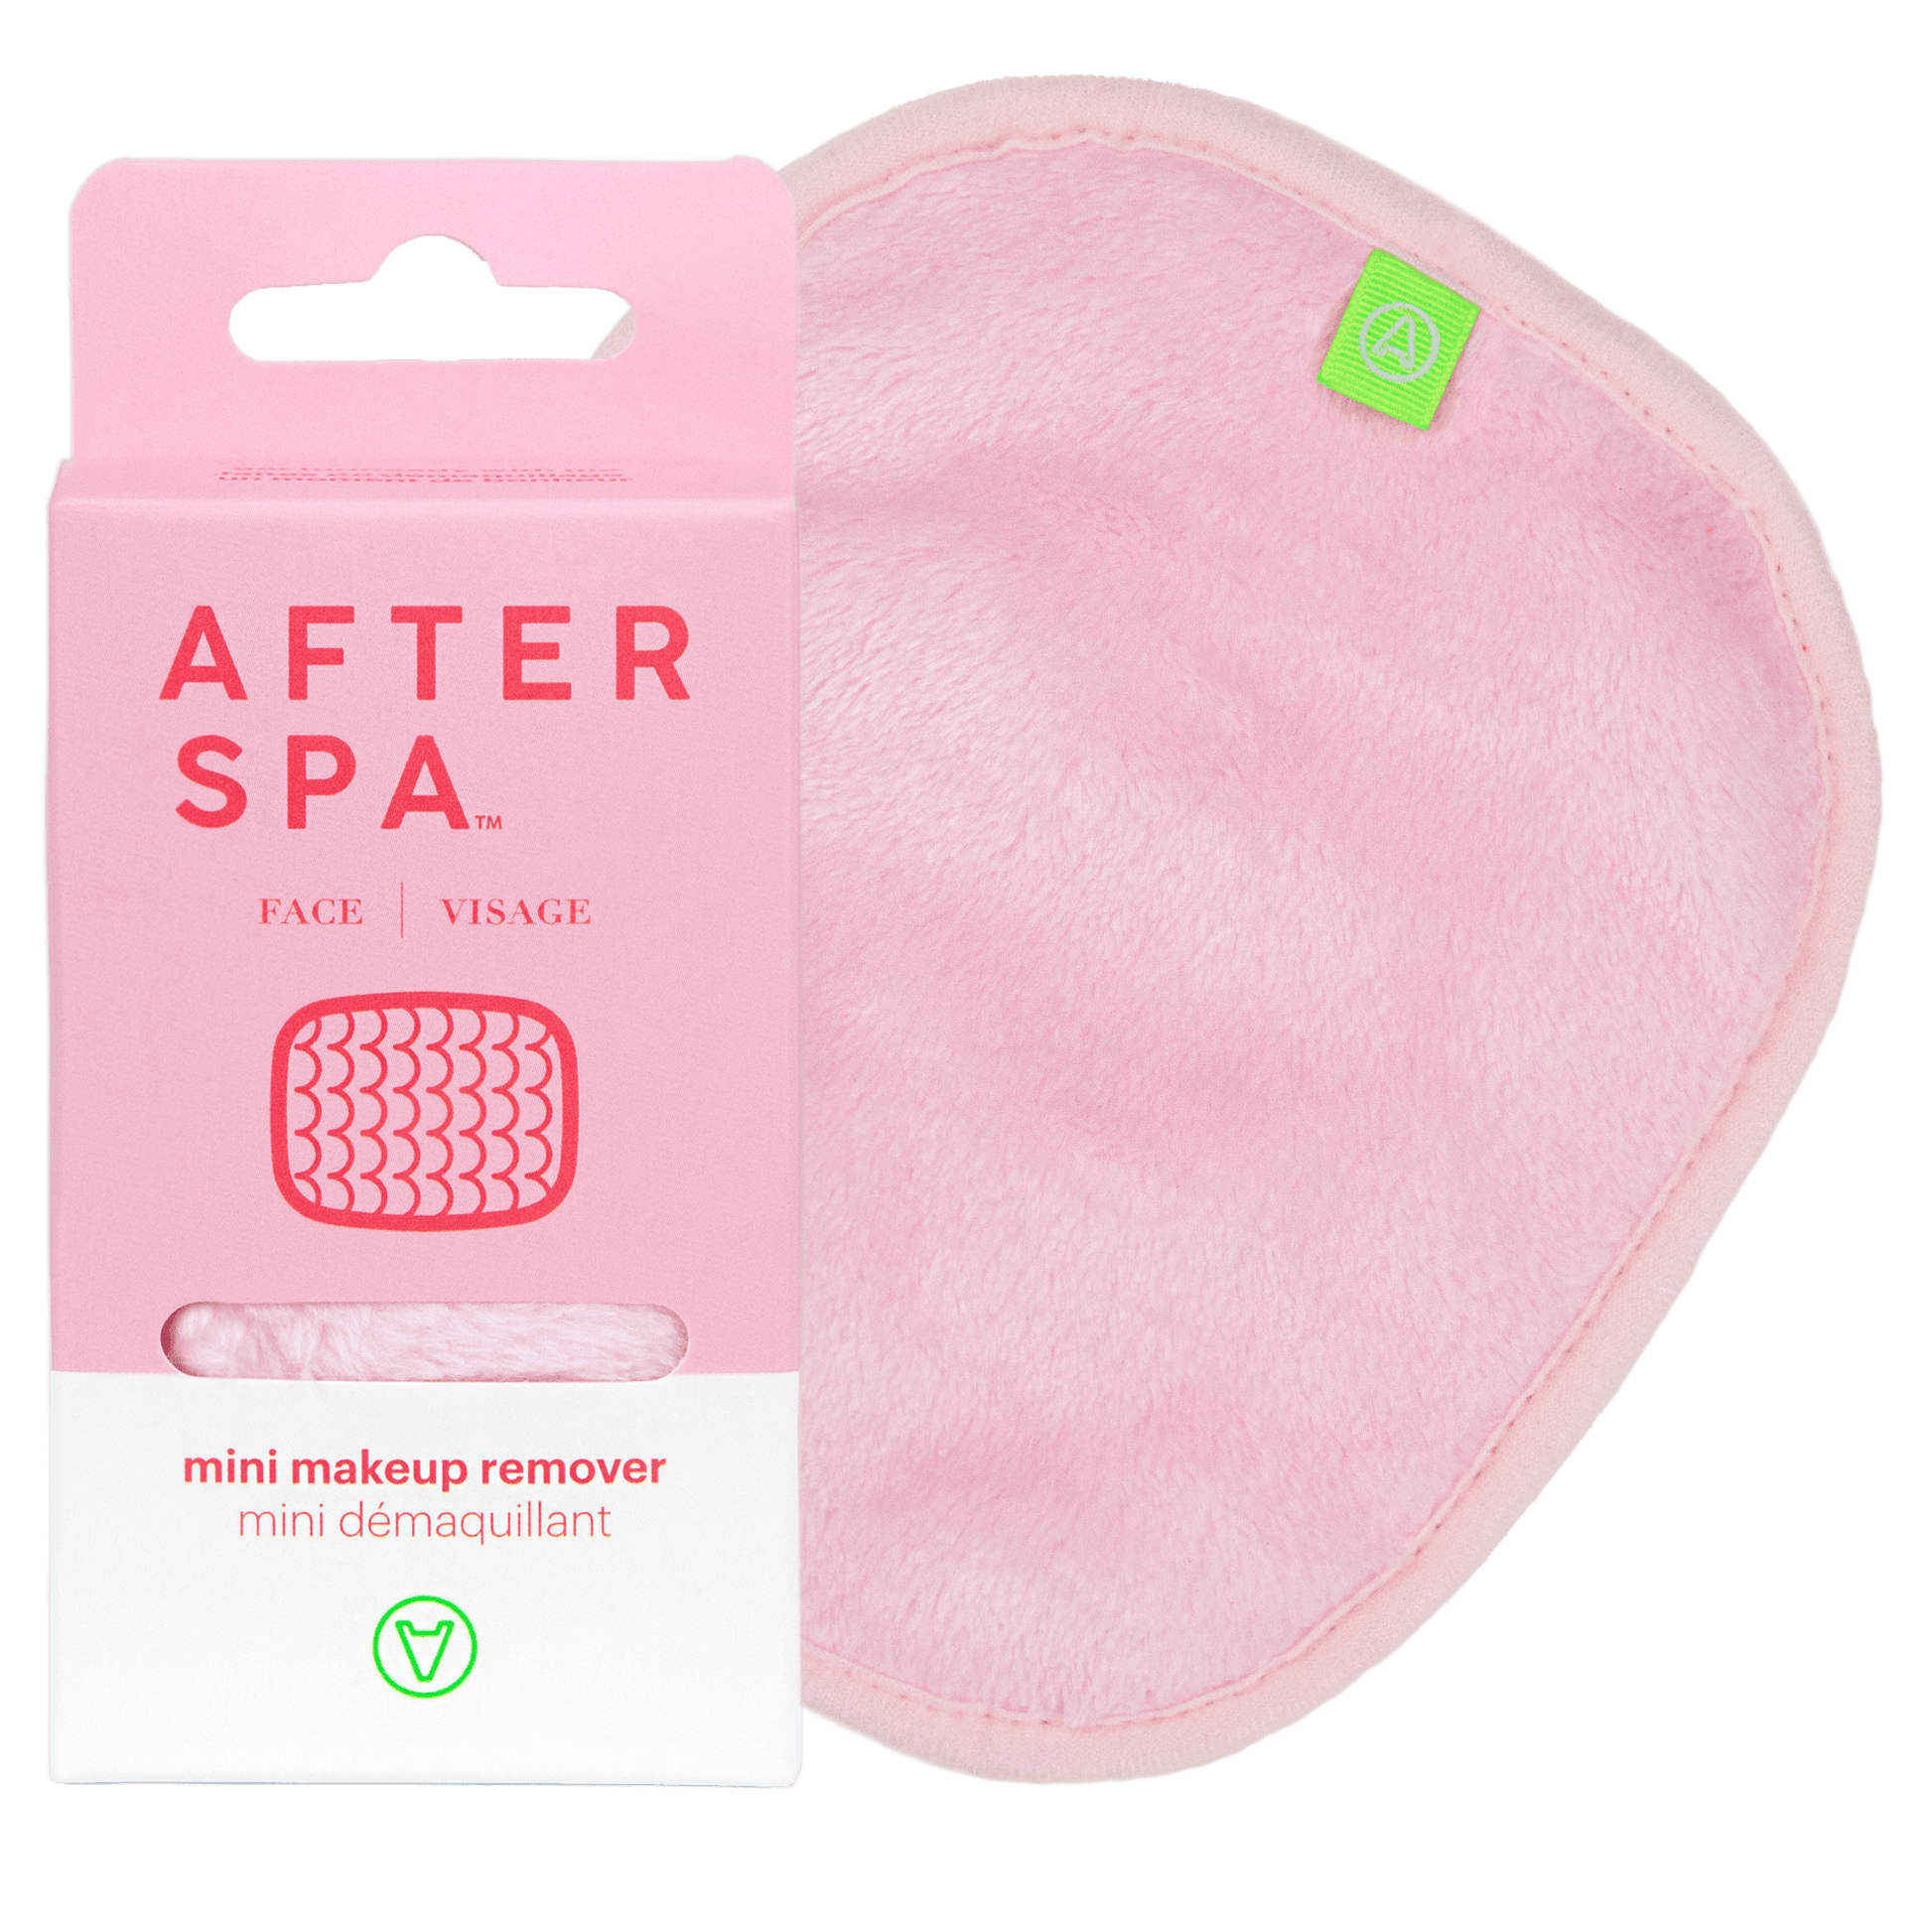 Afterspa Mini Makeup Remover _ Cloth to remove makeup from the face. 